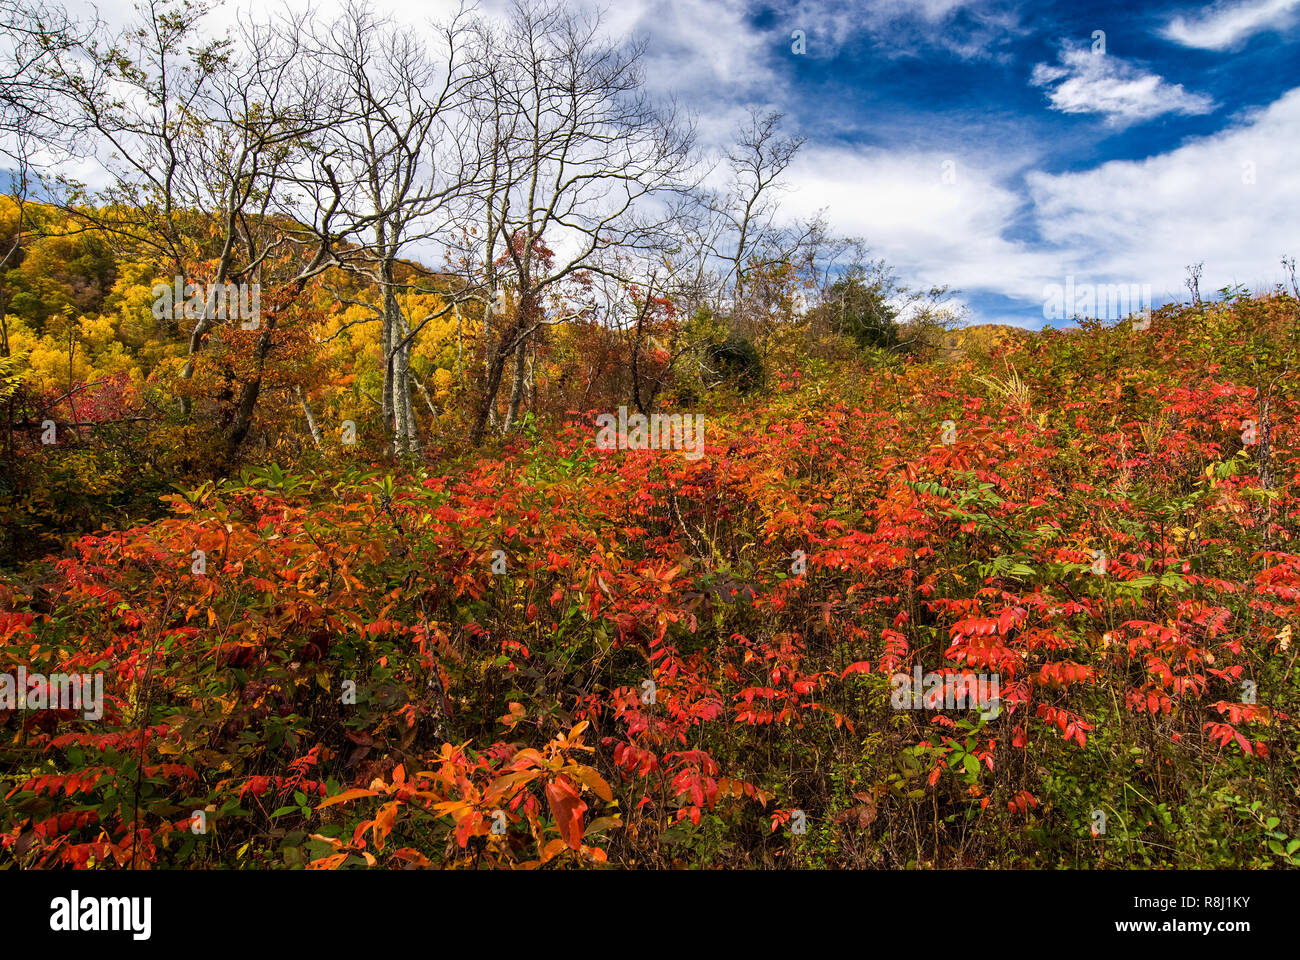 Red leaves of winged sumac (Rhus copallina) in foreground and yellow leaves of tulip poplar in forest contrast with blue sky in autumn scene in Nelson Stock Photo